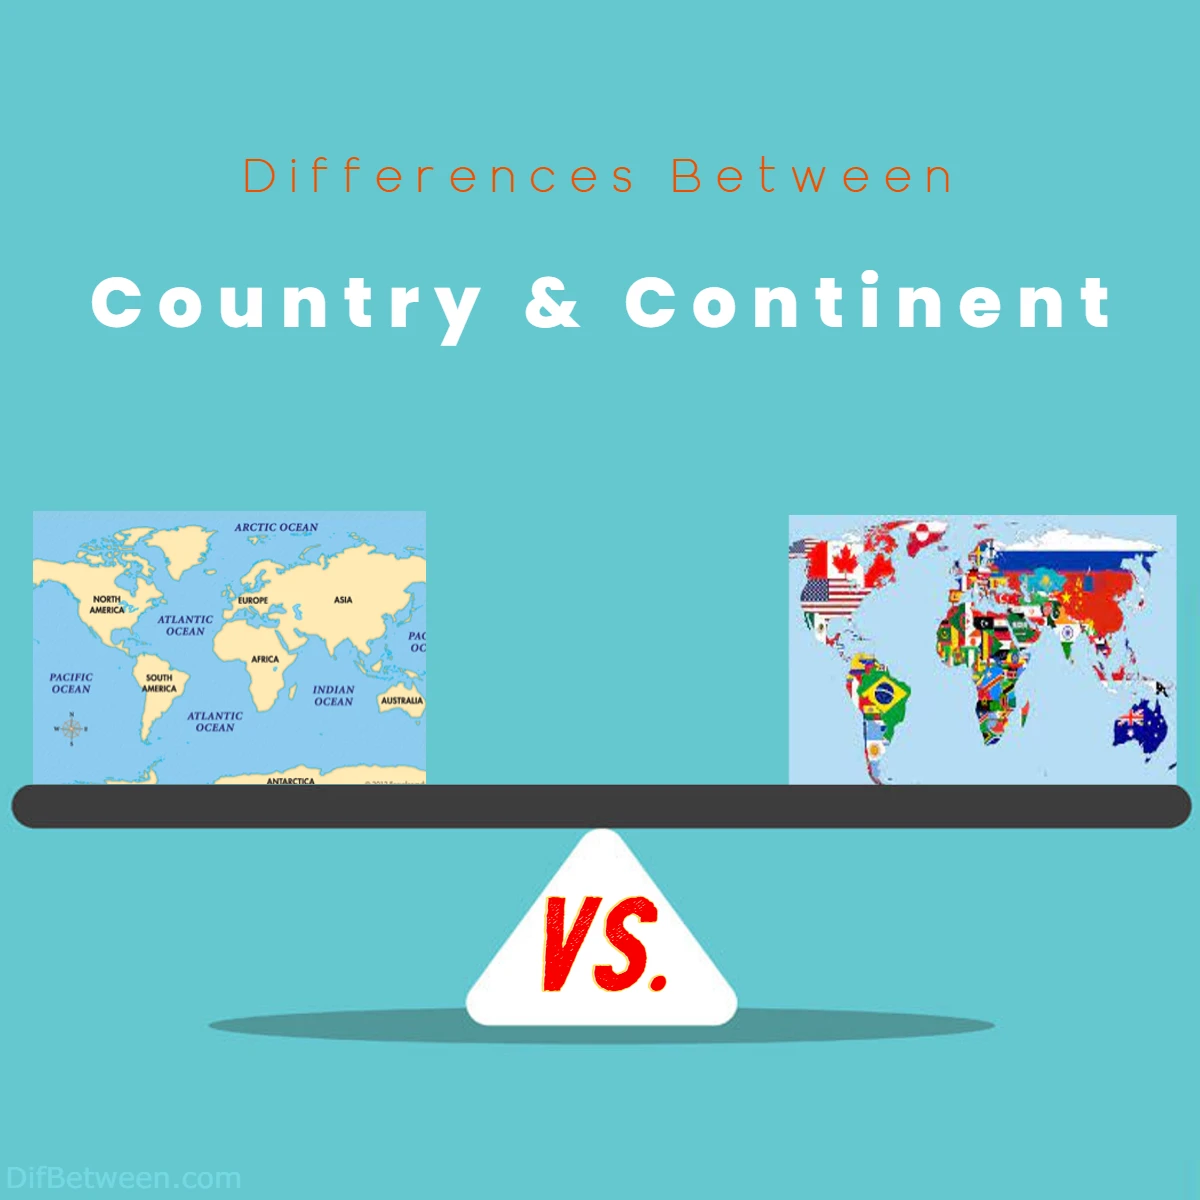 Differences Between Countries and Continents